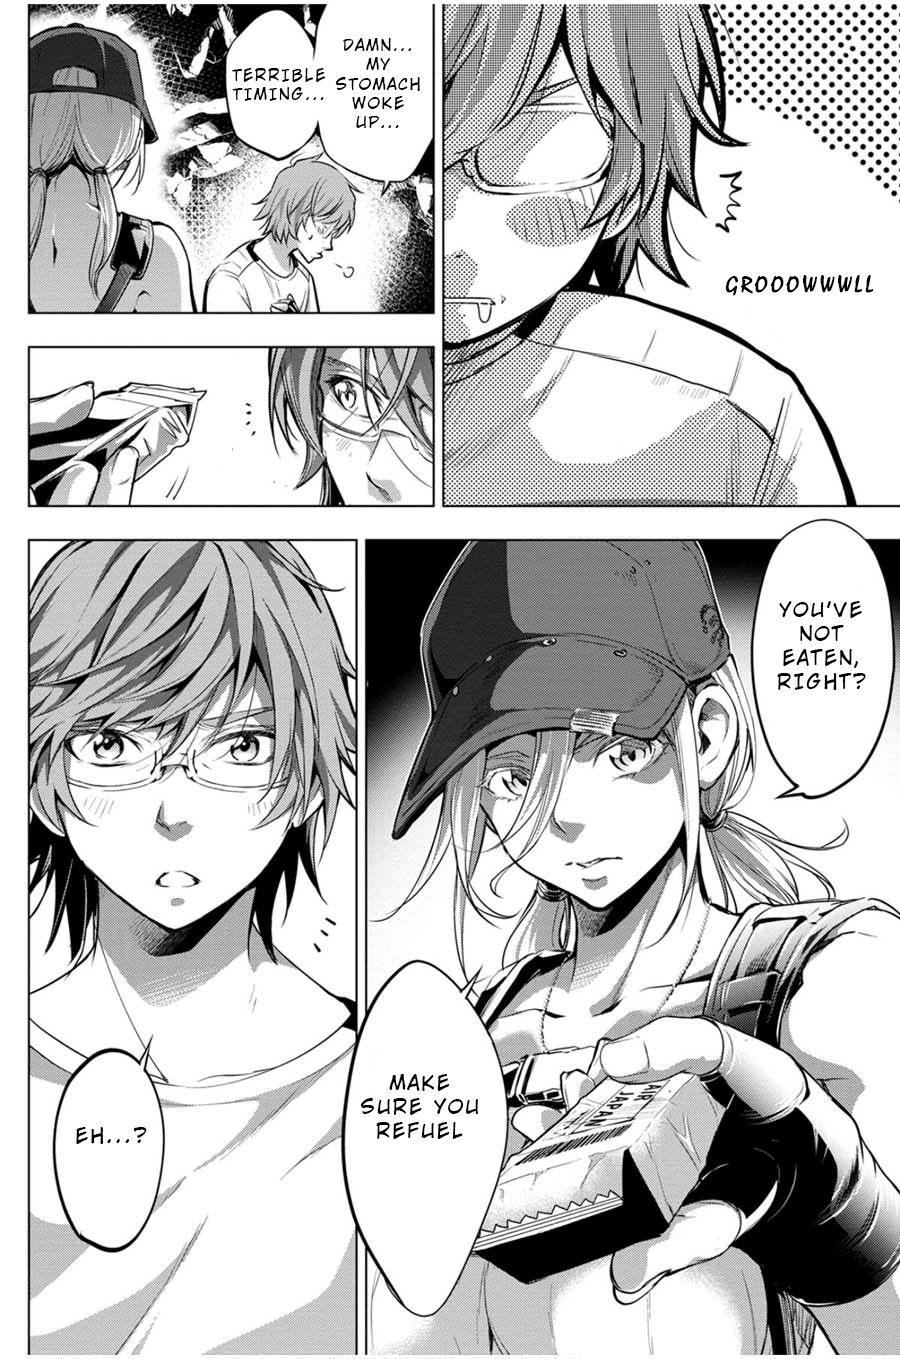 Ingoshima Vol. 3 Ch. 21 Time for a Sortie